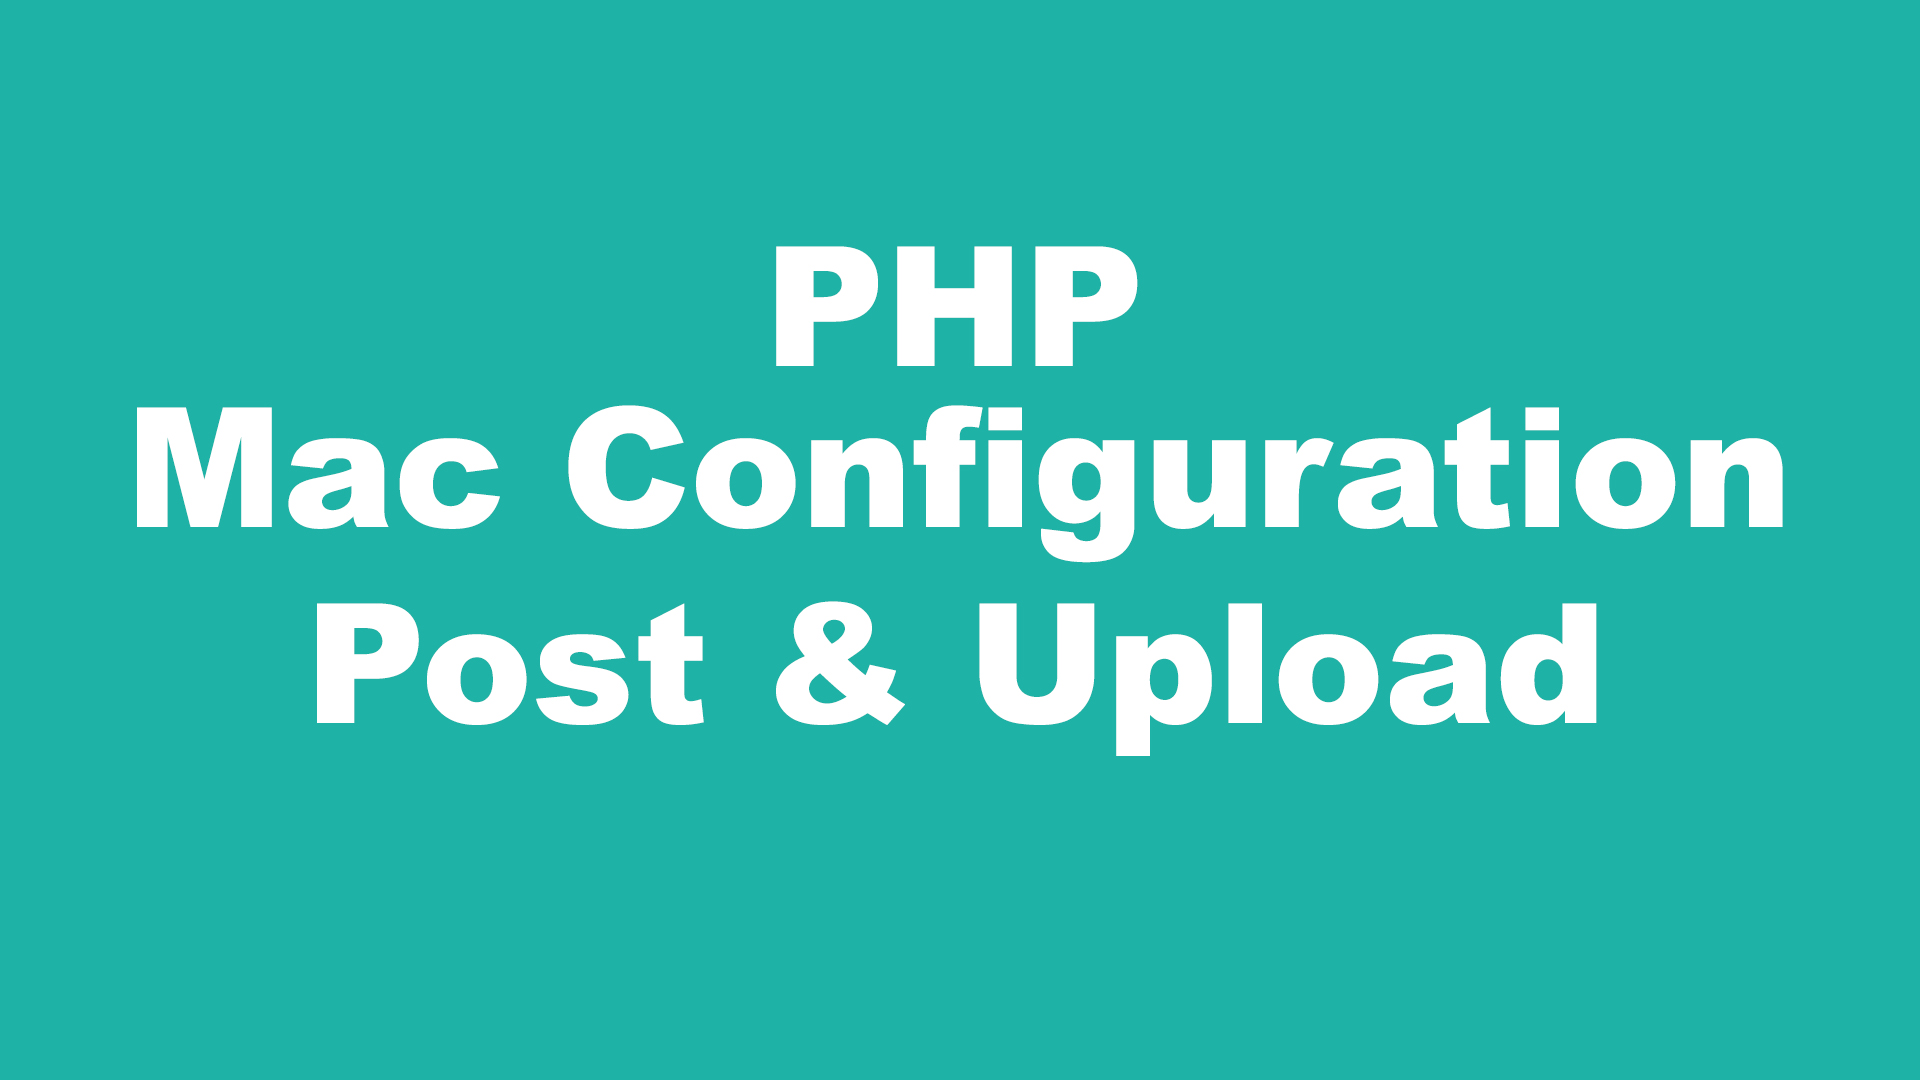 PHP Configuration File Changes